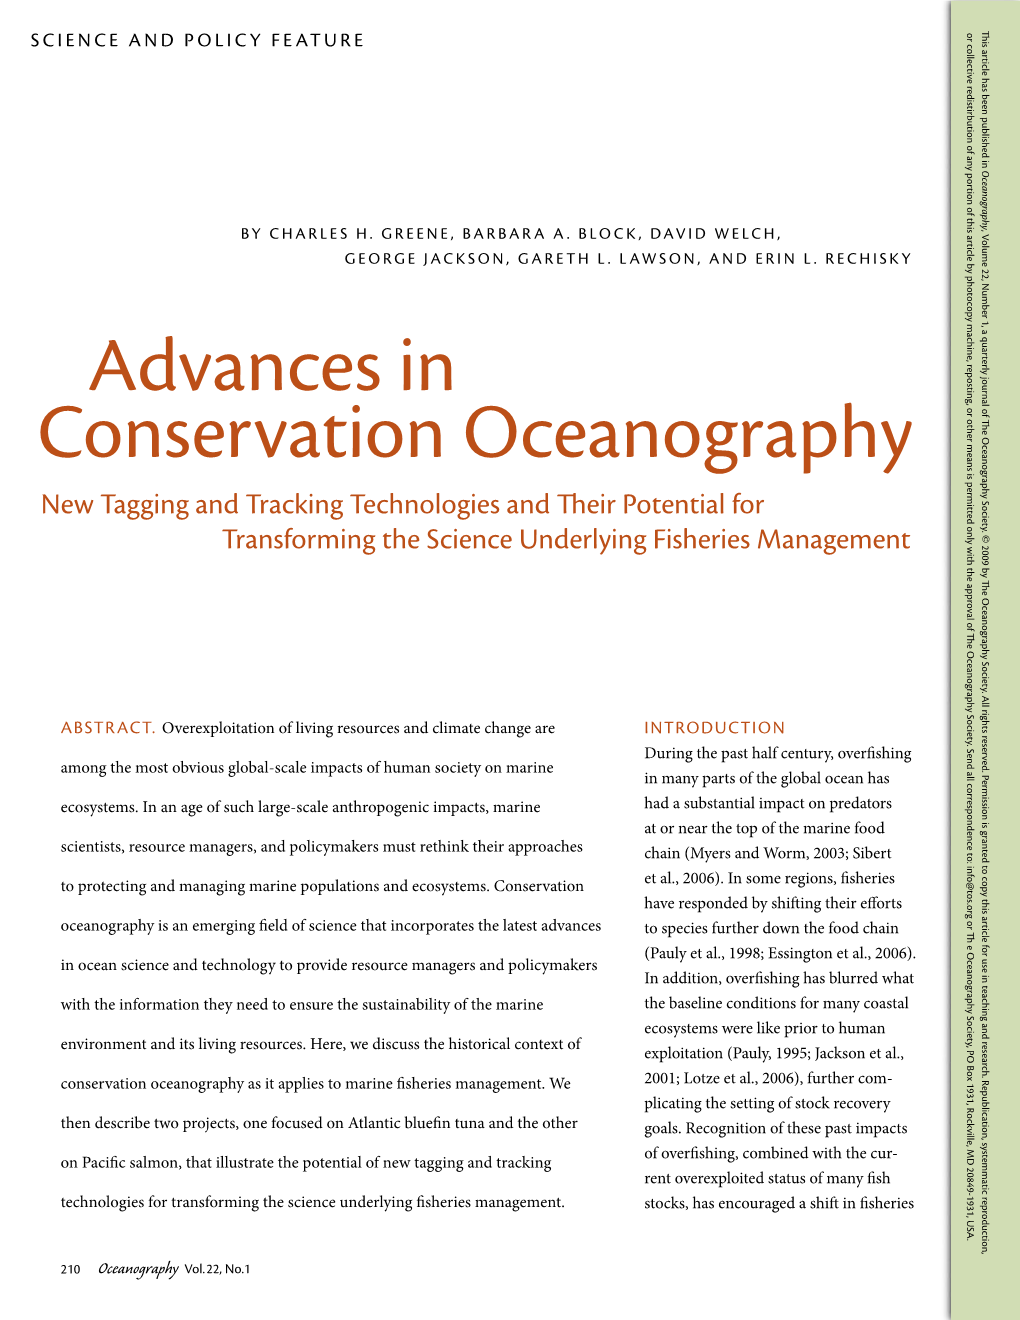 Advances in Conservation Oceanography